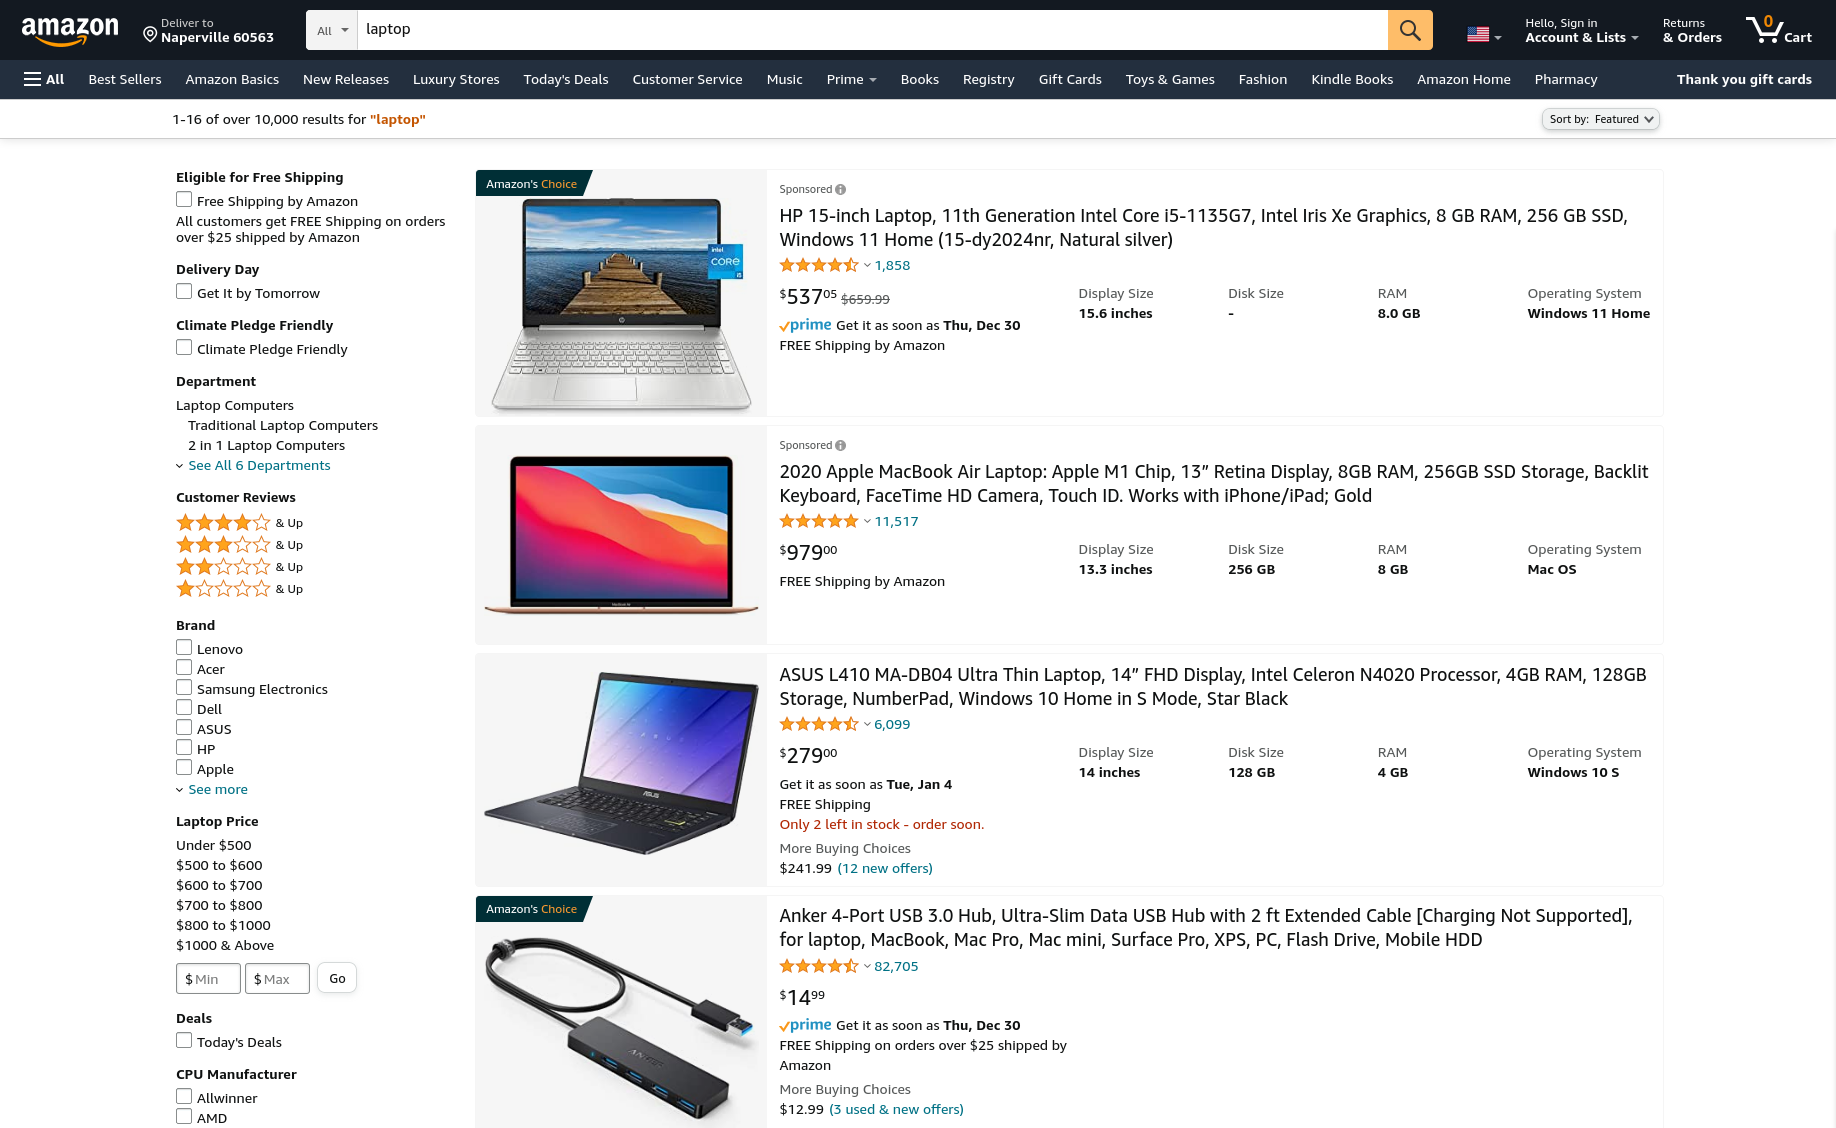 Screenshot of Amazon showing results for laptop